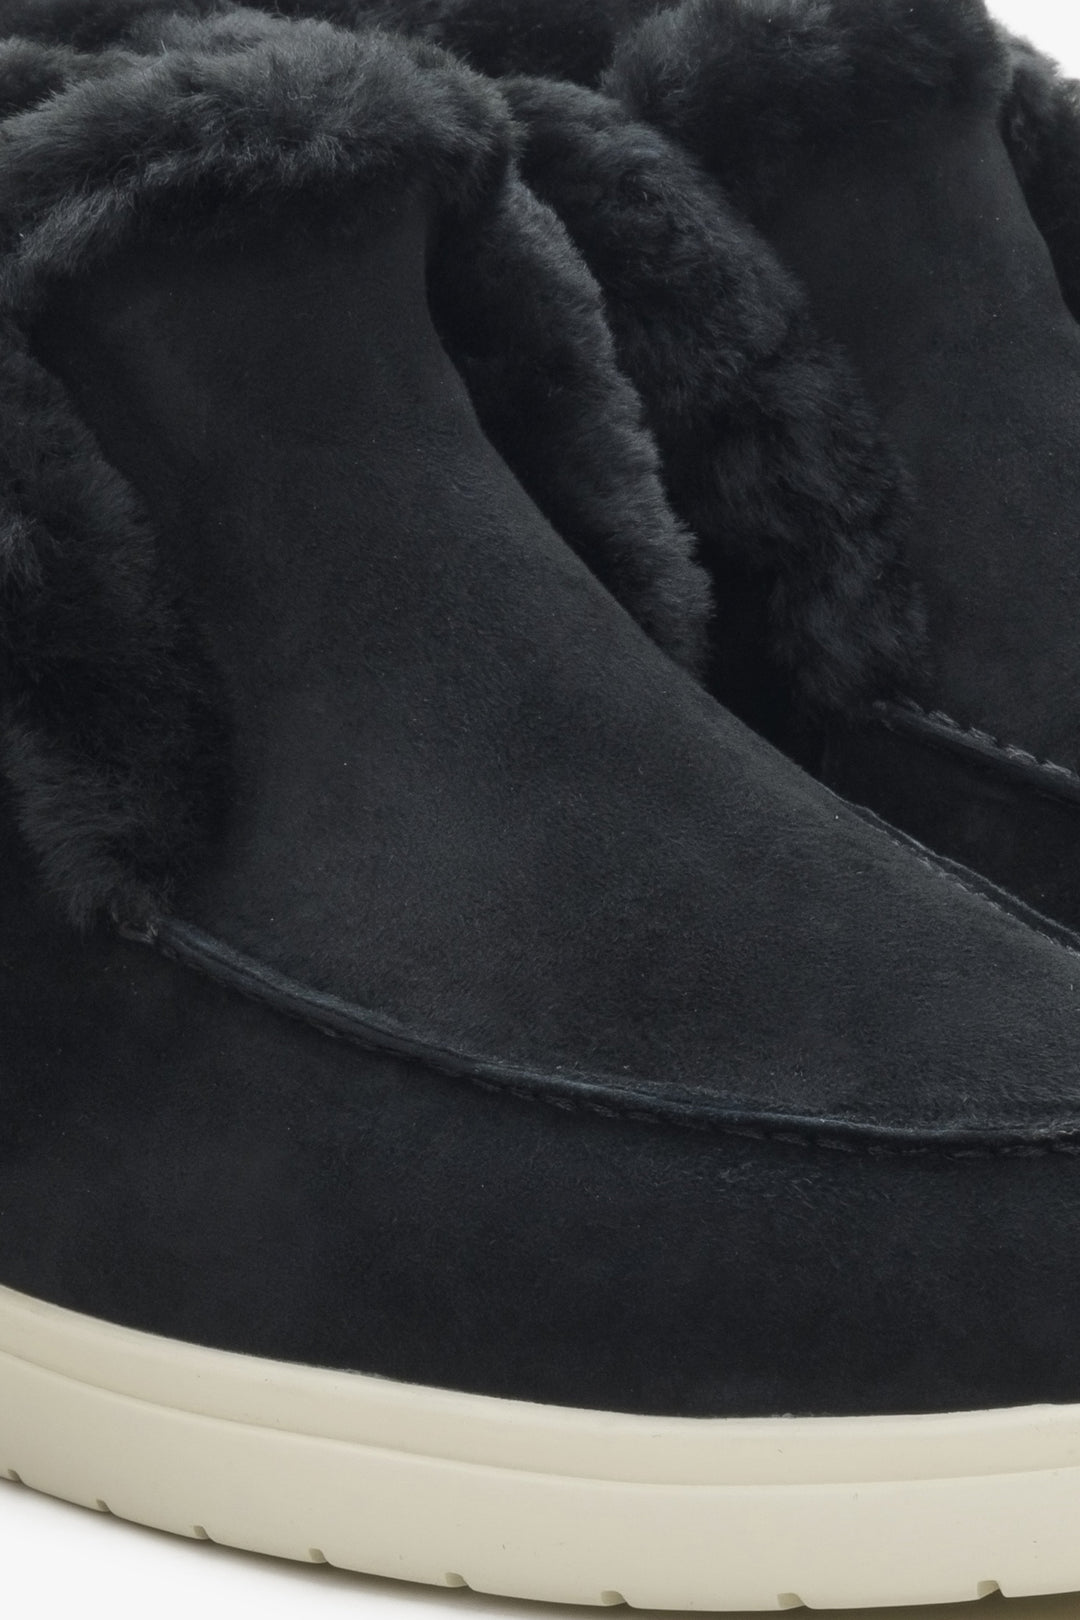 Women's fur and velour ankle boots in black colour.